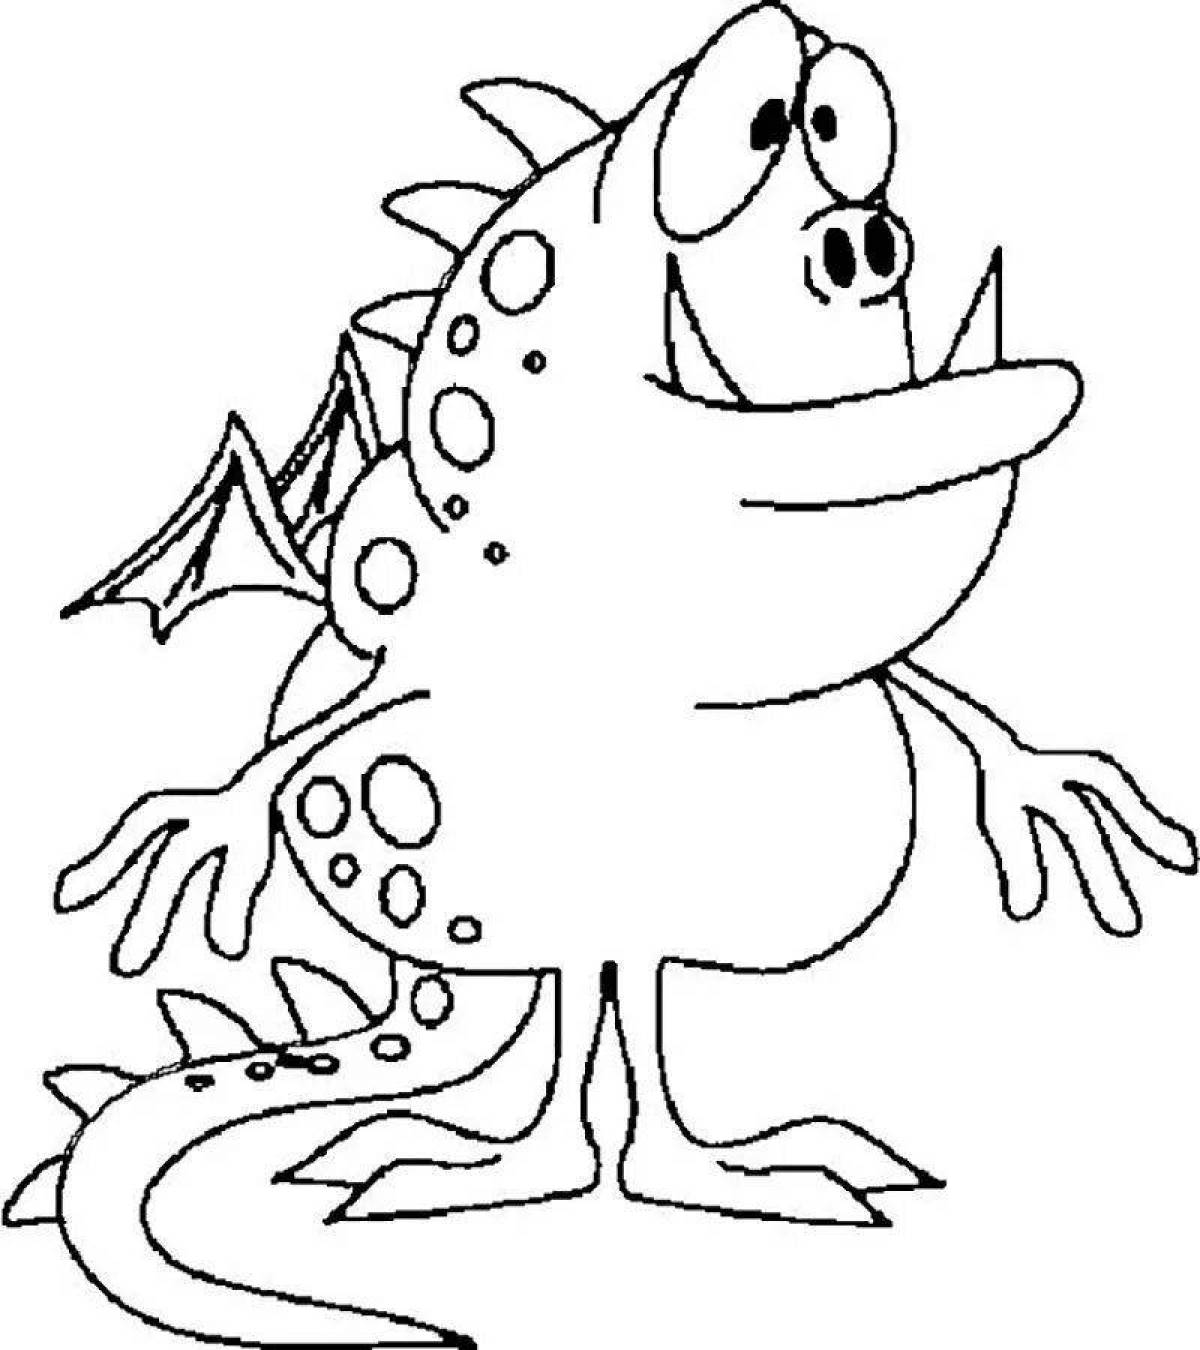 Happy monster coloring page